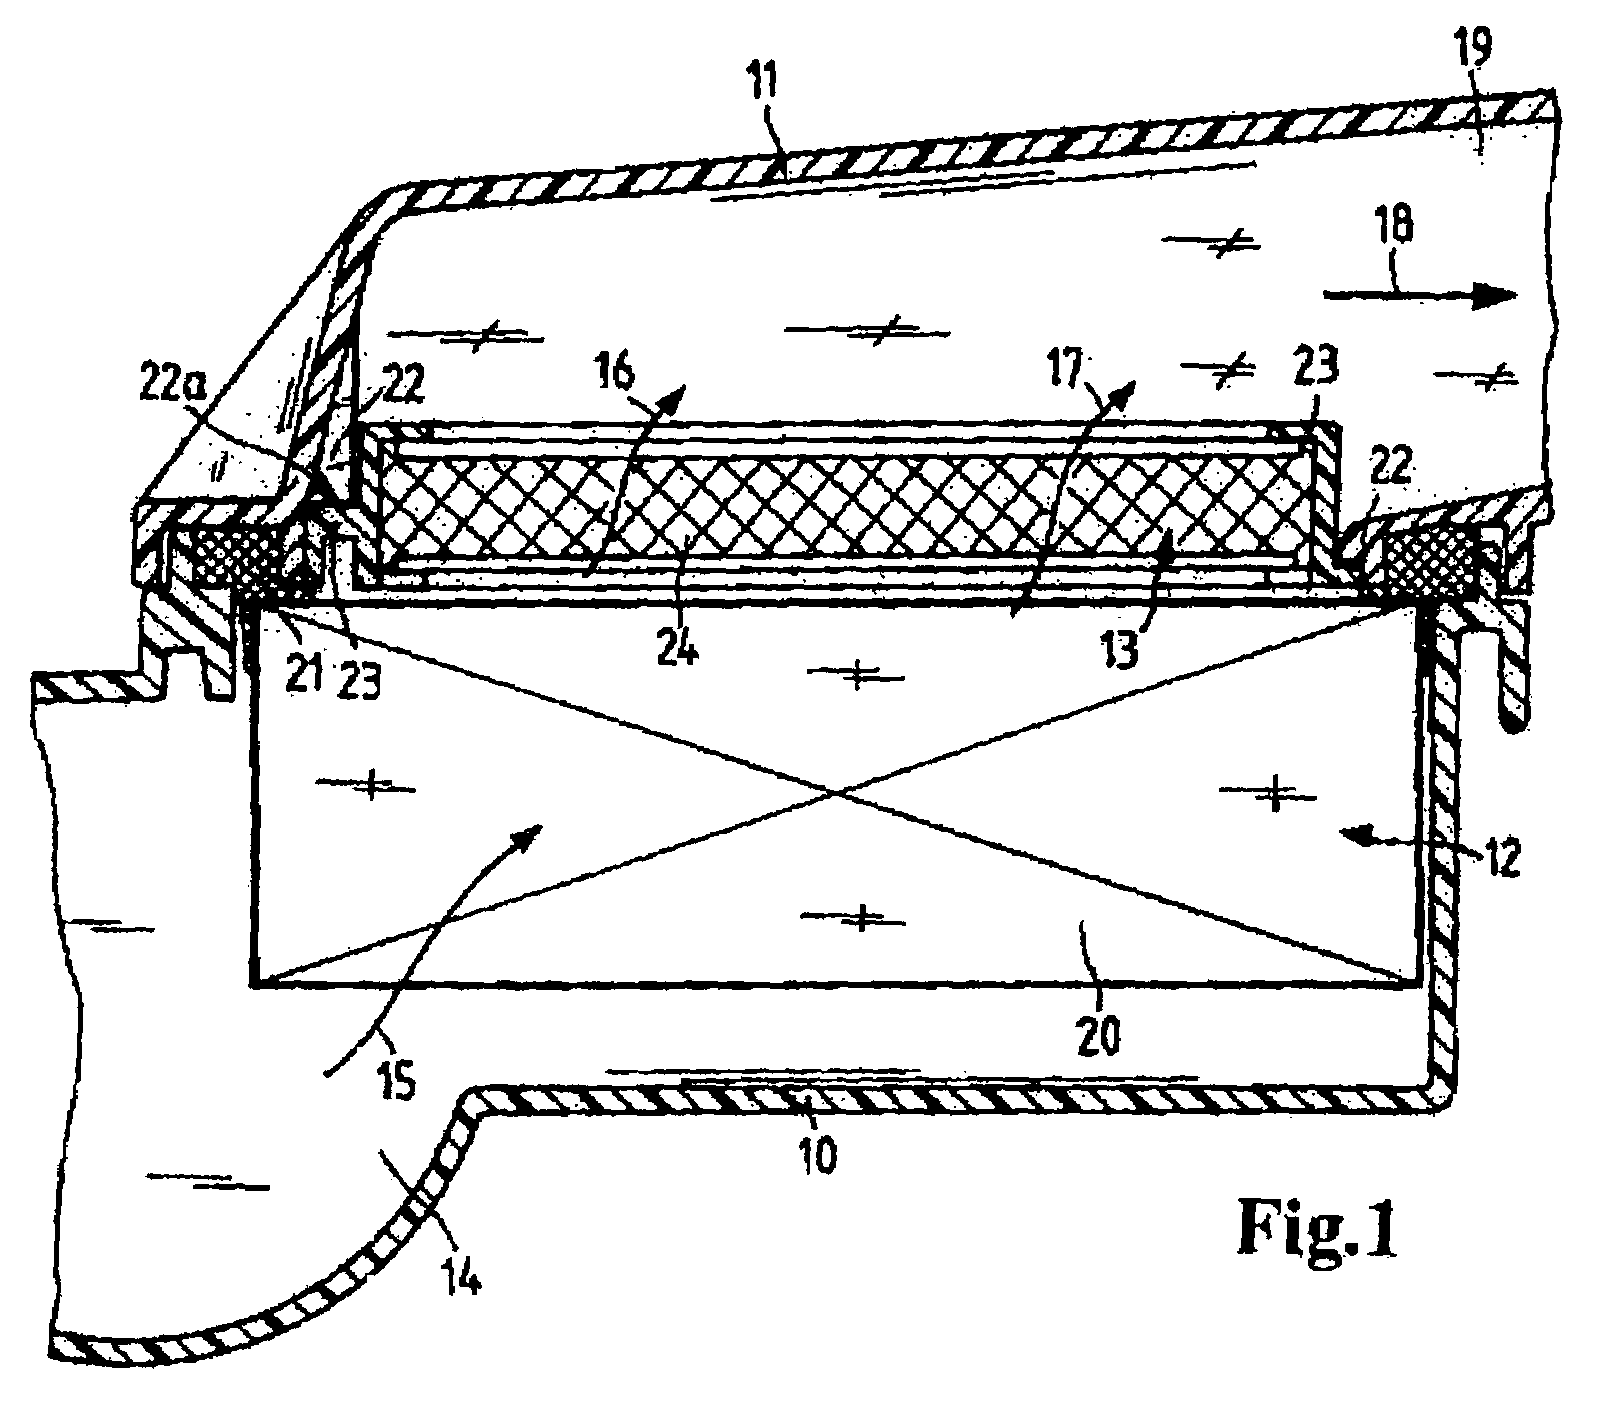 Active carbon coated filter element for preventing the leaking of hydrocarbons